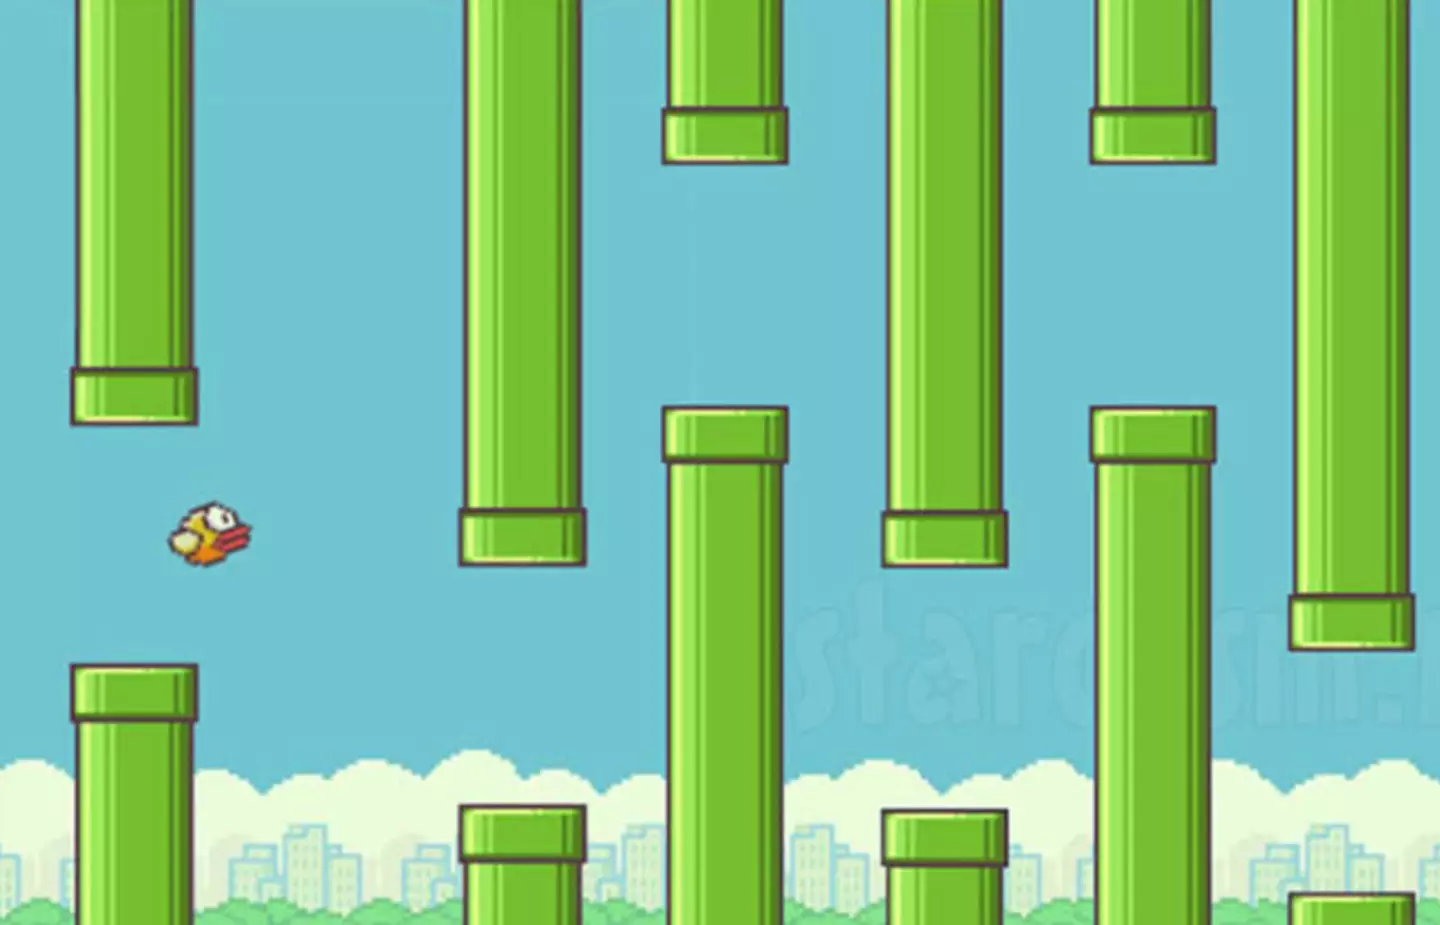 Flappy Bird was making tens of thousands a day at one point.